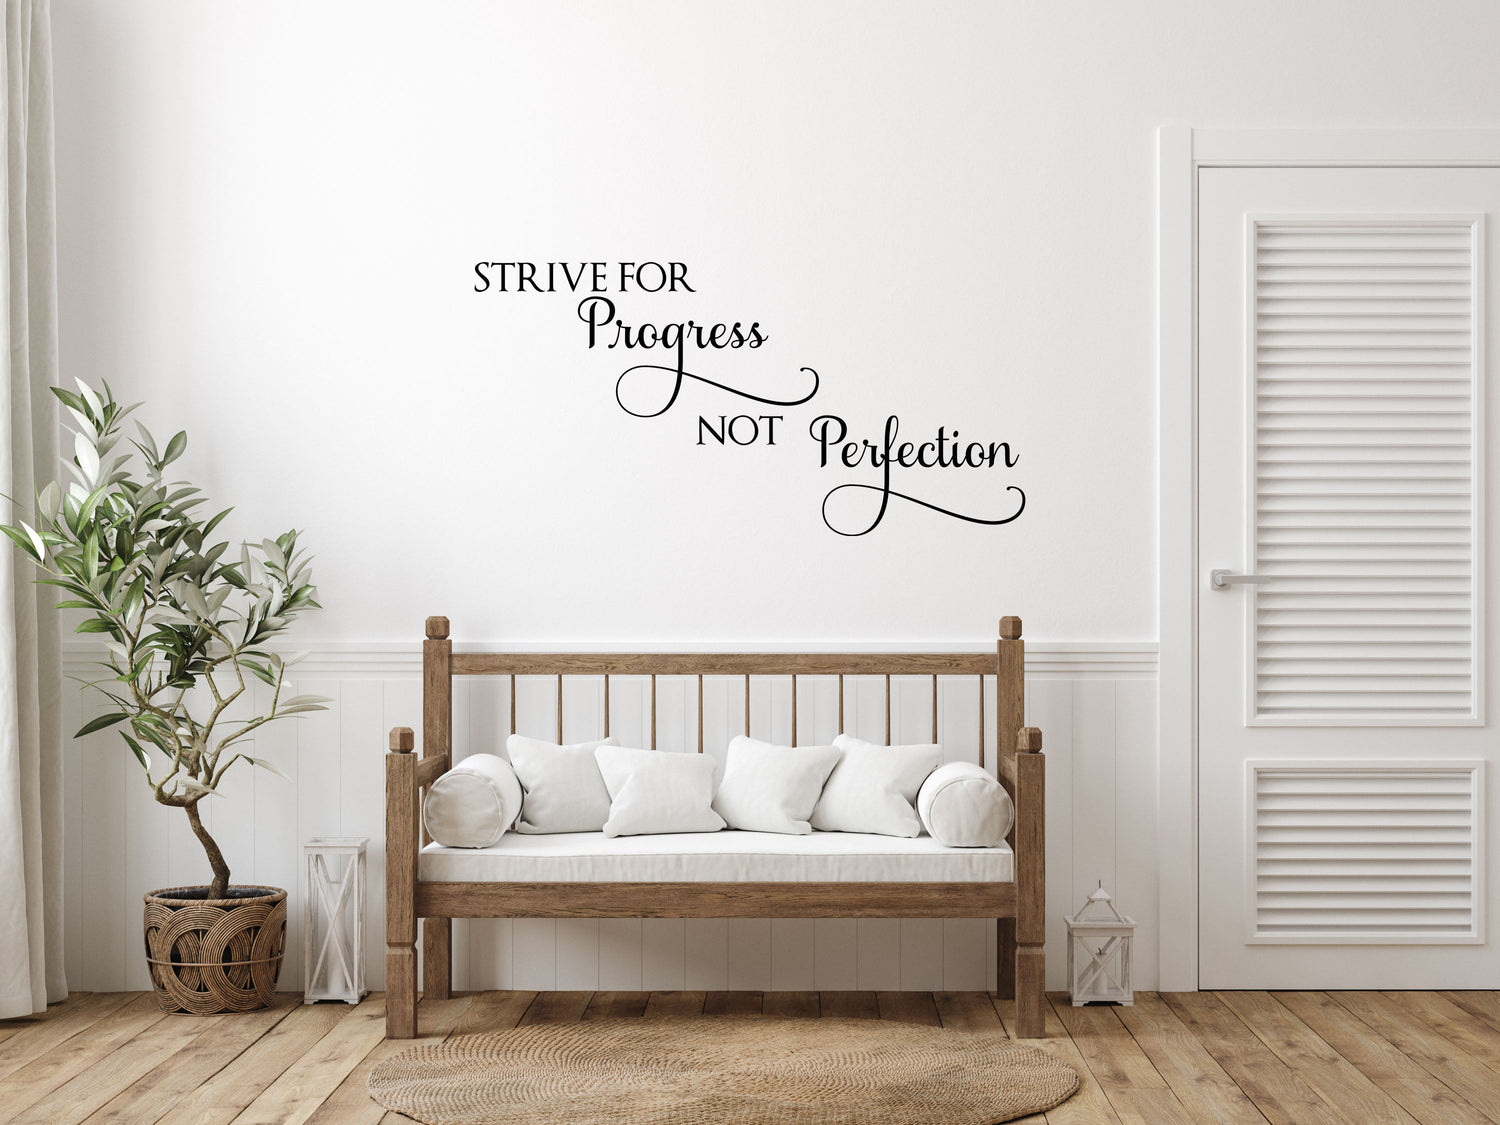 Strive For Progress Not Perfection Wall Quote Sticker - Inspirational Wall Decals Vinyl Wall Decal Inspirational Wall Signs 